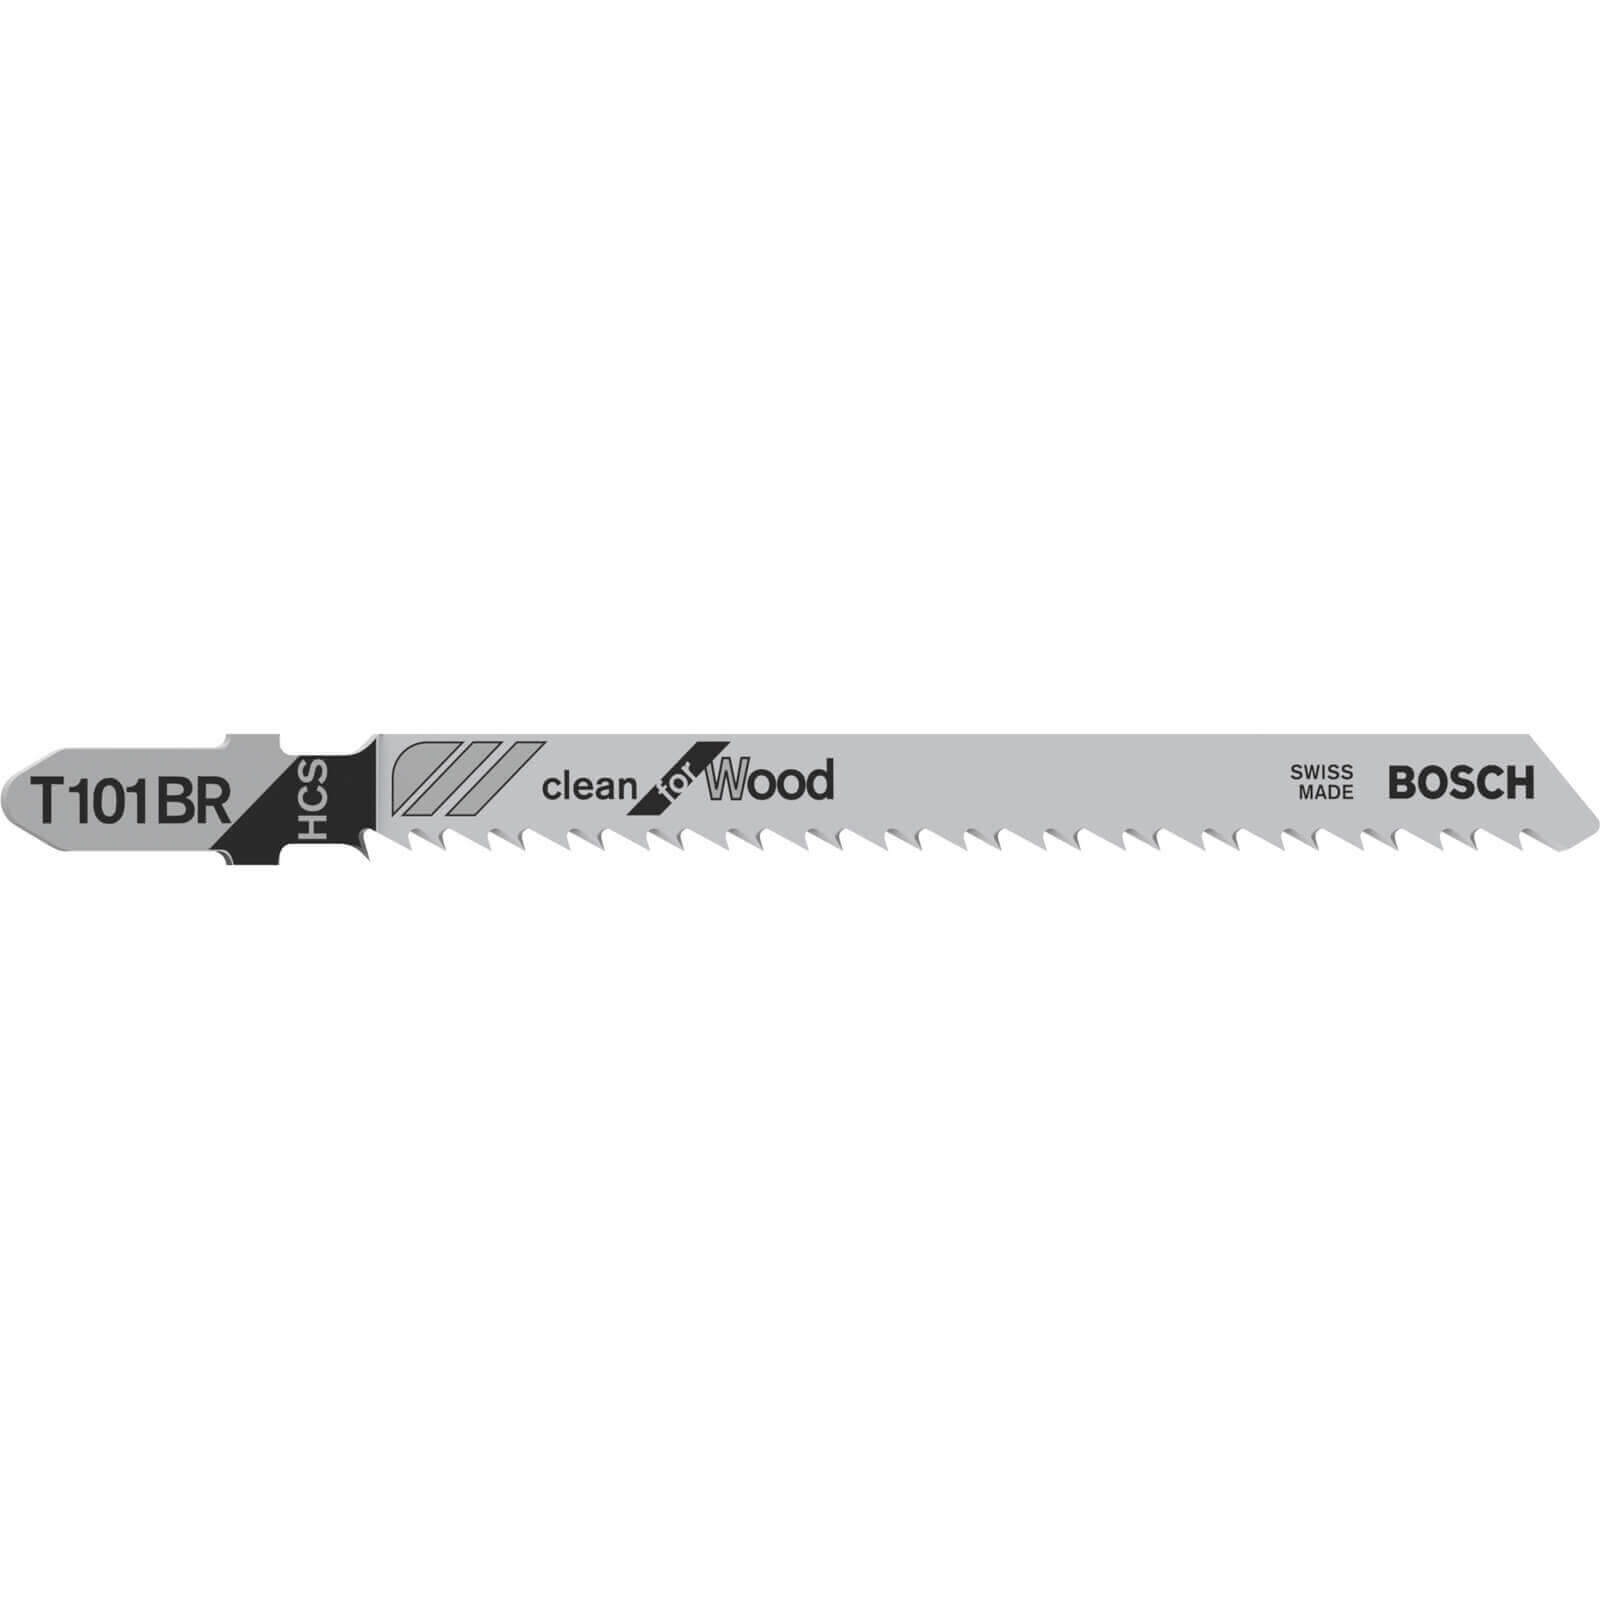 Photo of Bosch T101br Down Cutting Wood Jigsaw Blades Pack Of 5